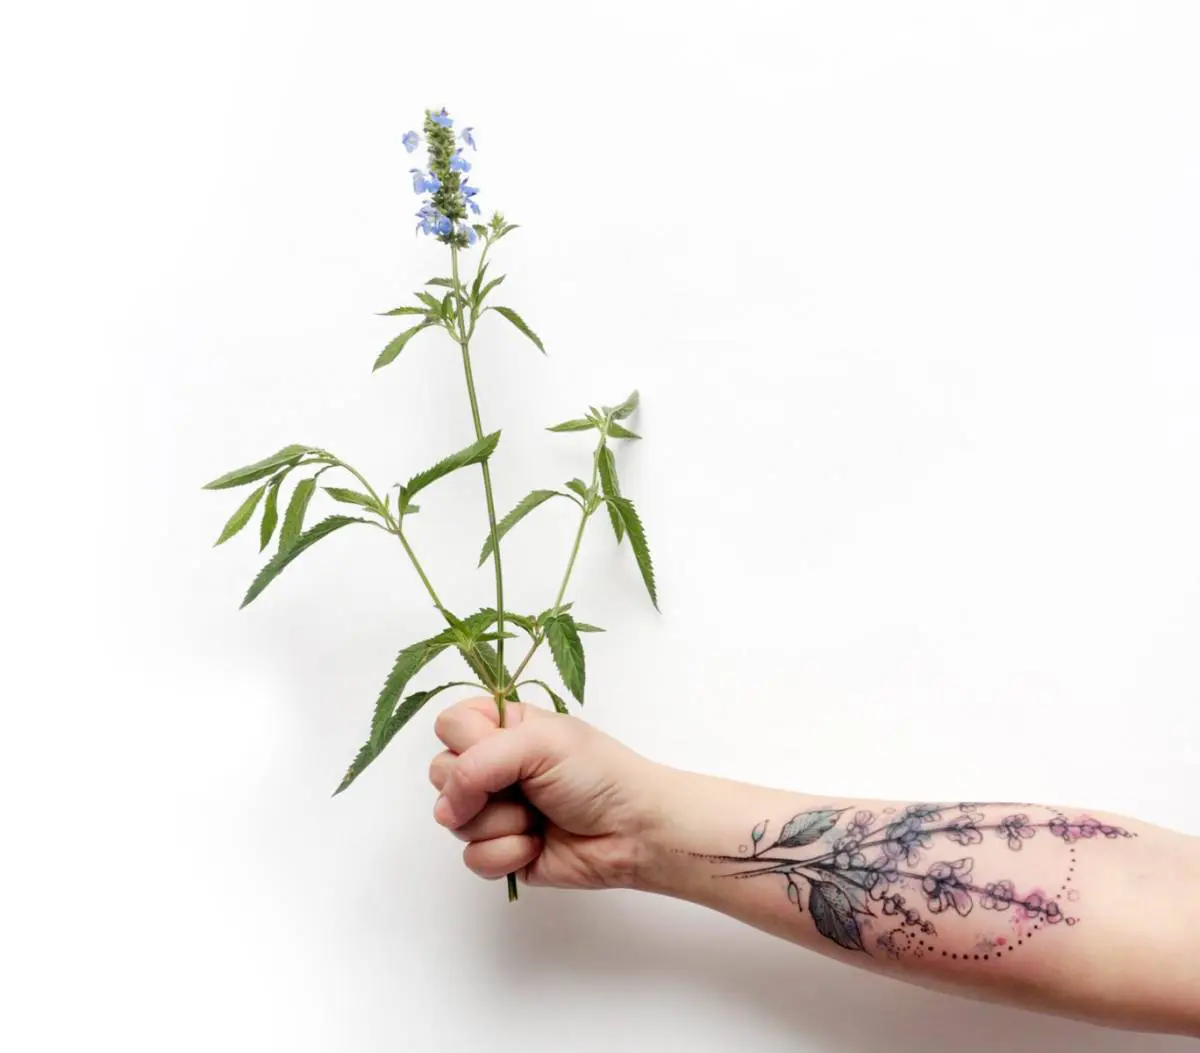 An tattooed with lavender holds a lavender plant. These flowers symbolize devotion, grace, and calmness.